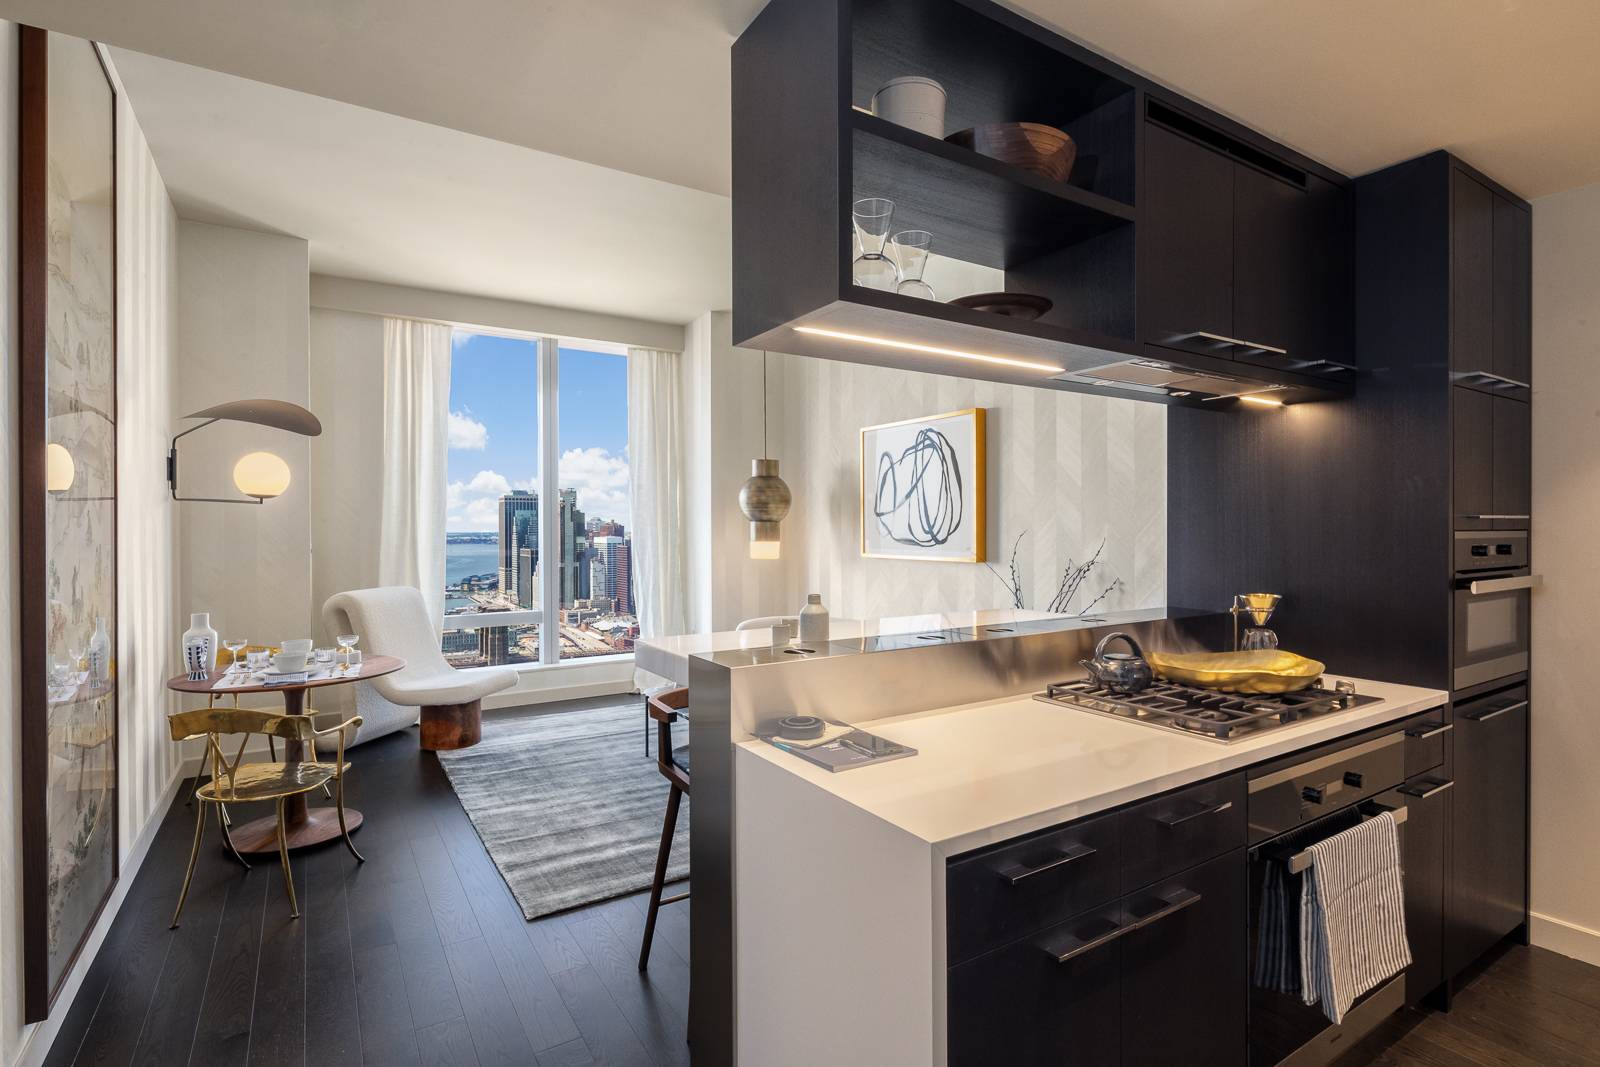 Residence 53B is a 1, 045 square foot two bedroom, two bathroom with an open gourmet kitchen and breakfast bar.